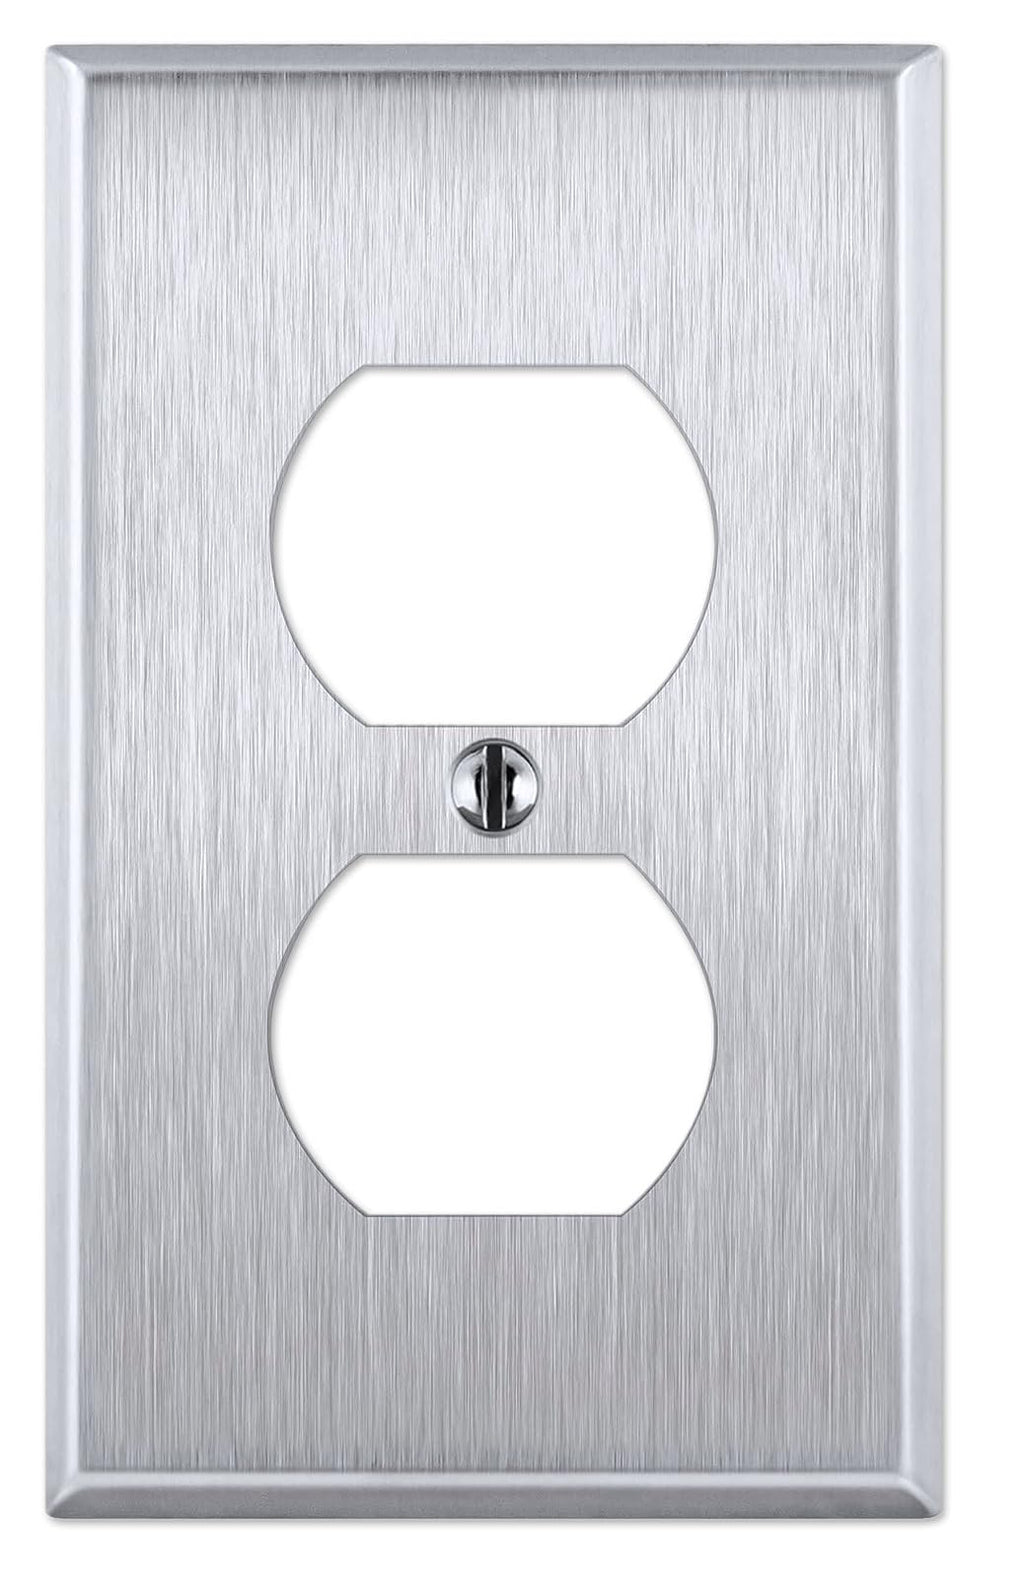 [Australia - AusPower] - 1 Gang Electrical Outlet Stainless Steel Cover Plate, Receptacle Socket Cover for Outlets, Outlet Wall Plate, One Gang Wall Plug Cover - Stainless Steel - UL Listed, 4.5 x 2.75 Inches (Made in USA) 1 Gang Outlet 